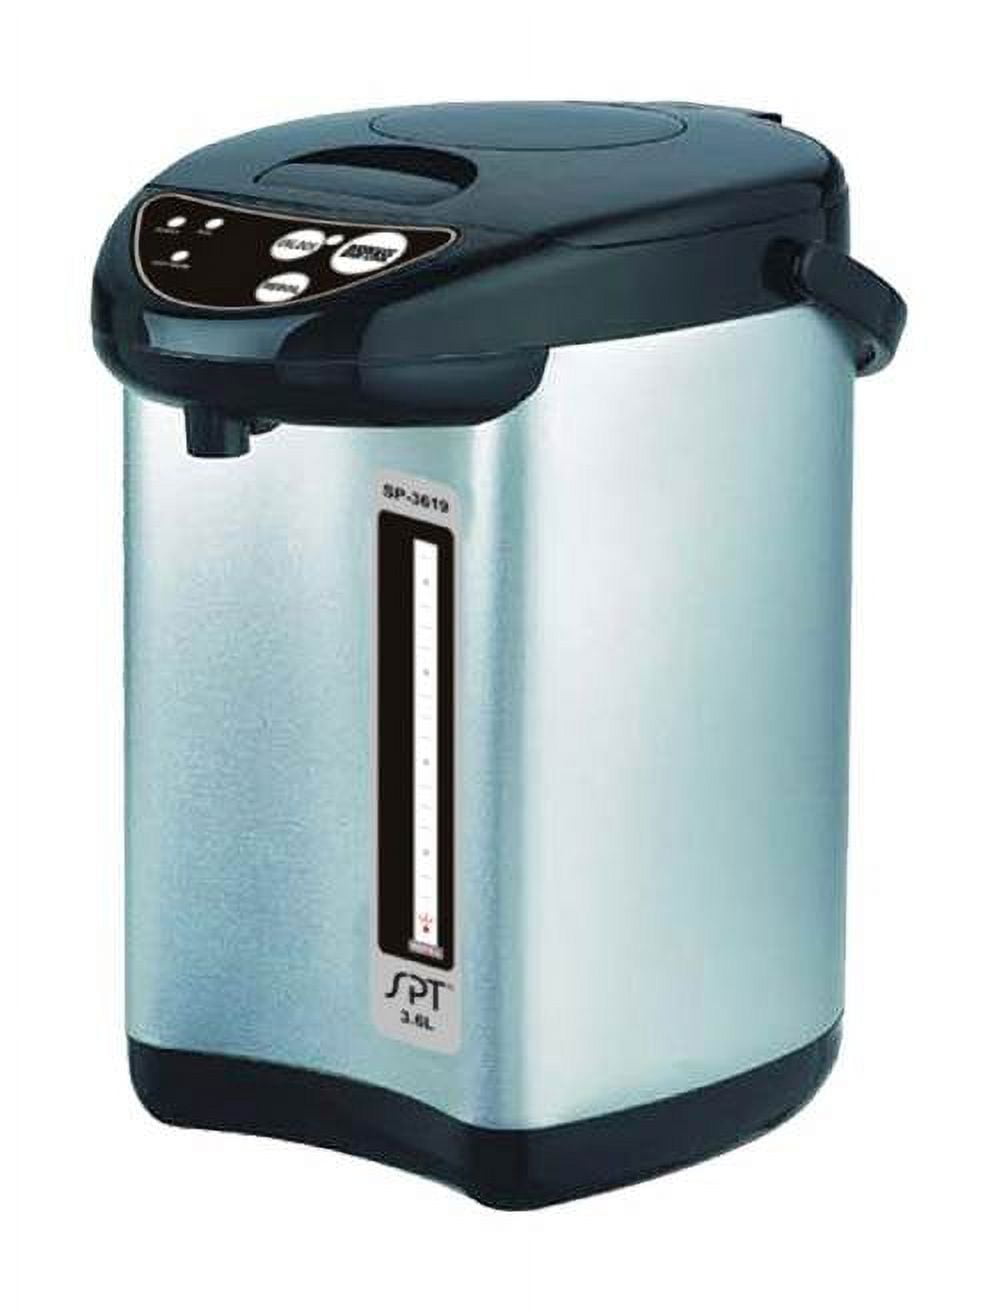 Bloomfield 2 Gal Stainless Steel Automatic Hot Water Dispenser for Canada - 7L x 17 3/4W x 23 5/8H